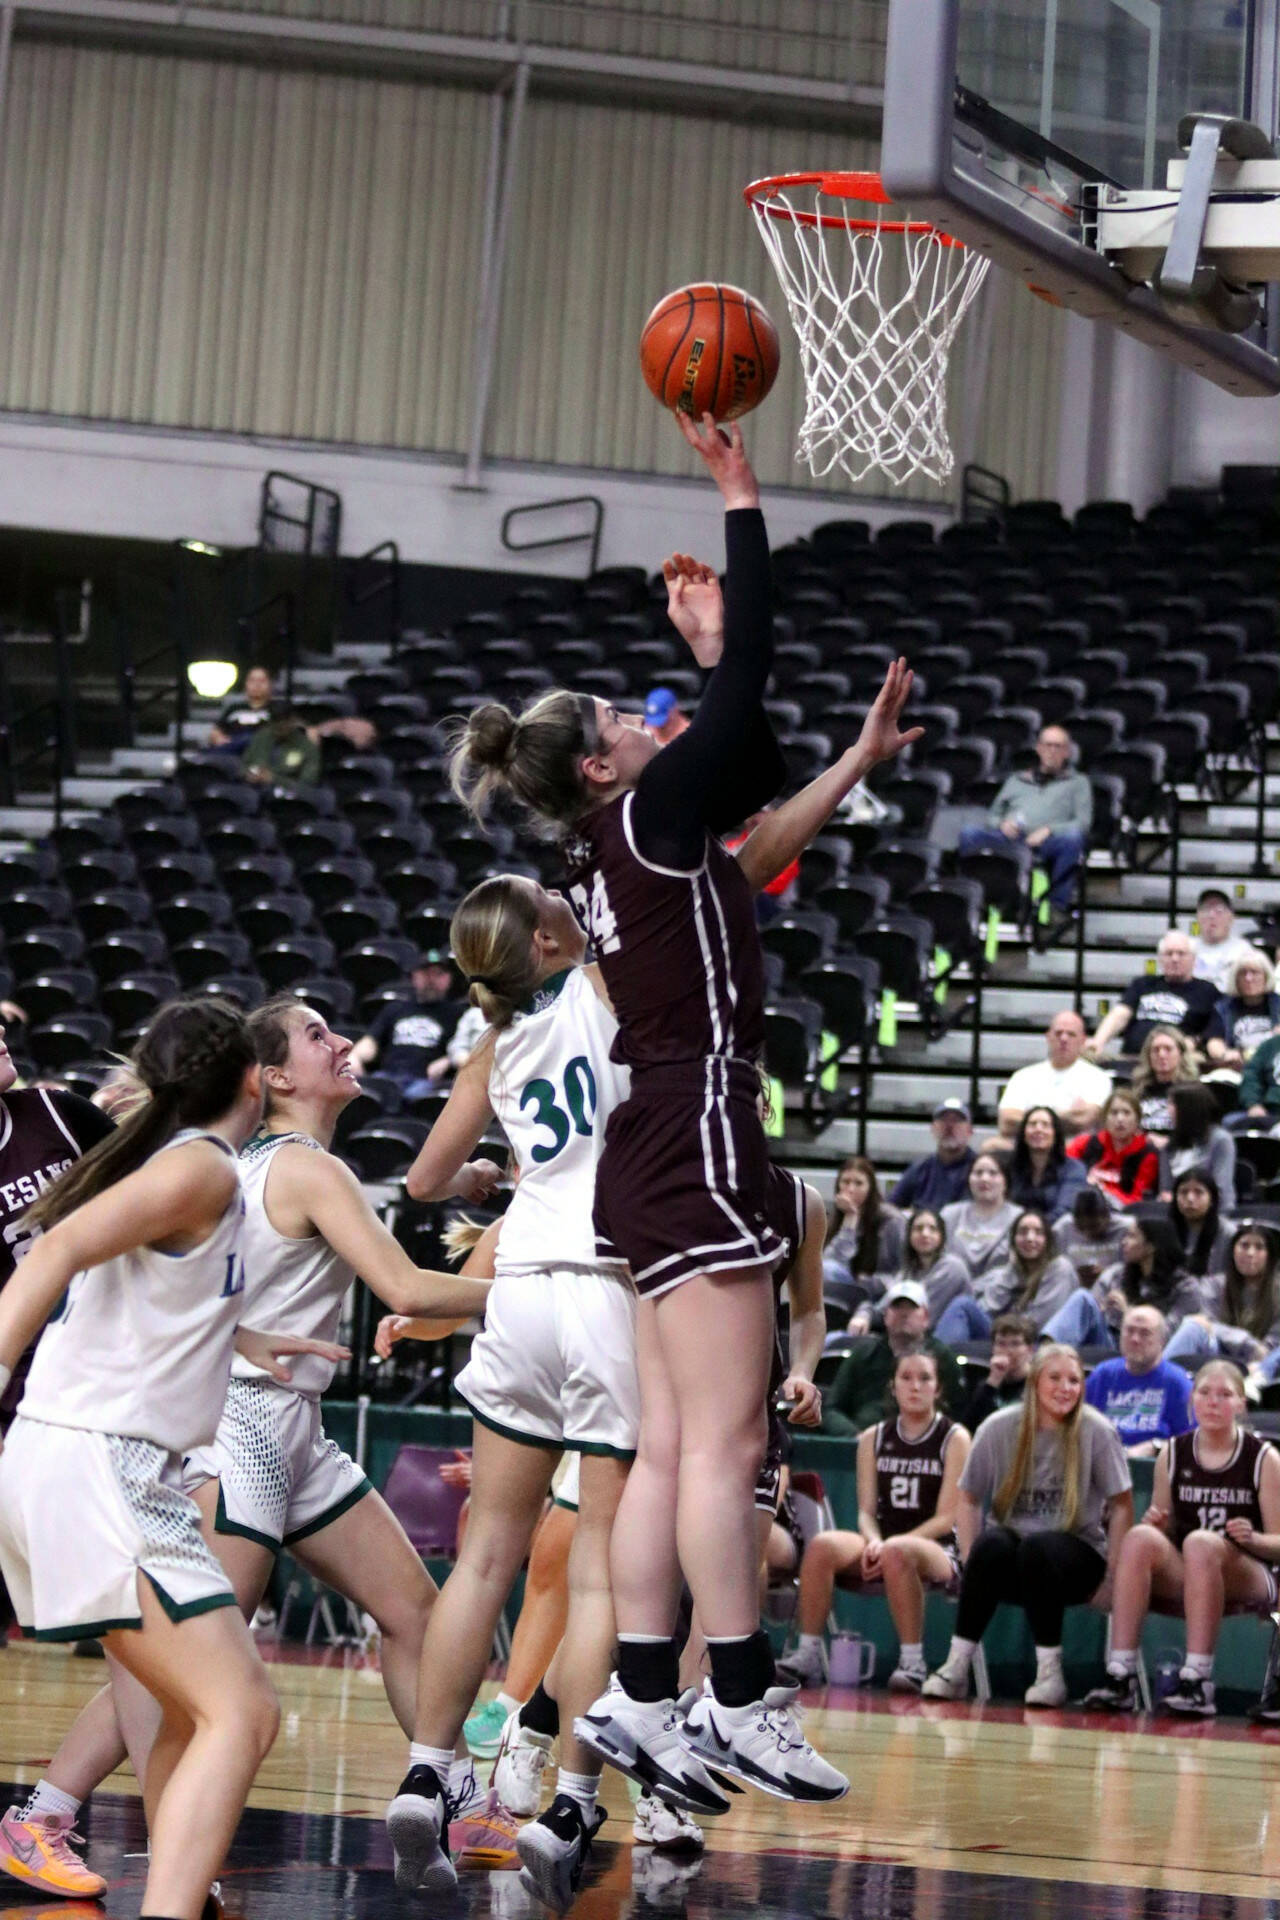 PHOTO BY HAILEY BLANCAS Montesano forward Jillie Dalan, right, scores two of her team-high 14 points during the Bulldogs’ 59-35 loss to Lakeside in a 1A State Tournament Round of 12 game on Wednesday in Yakima.